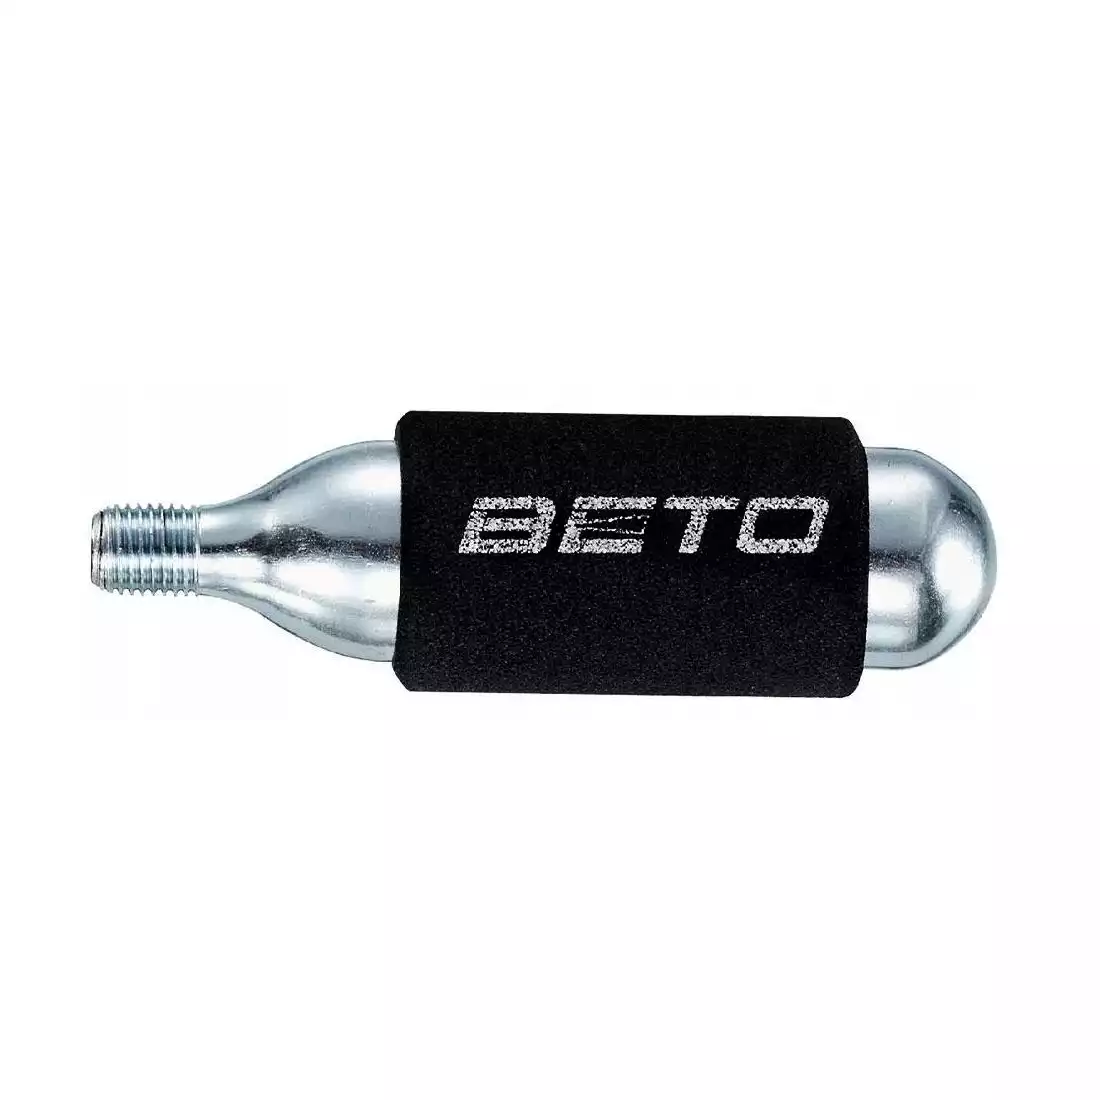 BETO CO2-11 CO2-11 handy CO2 bicycle pump